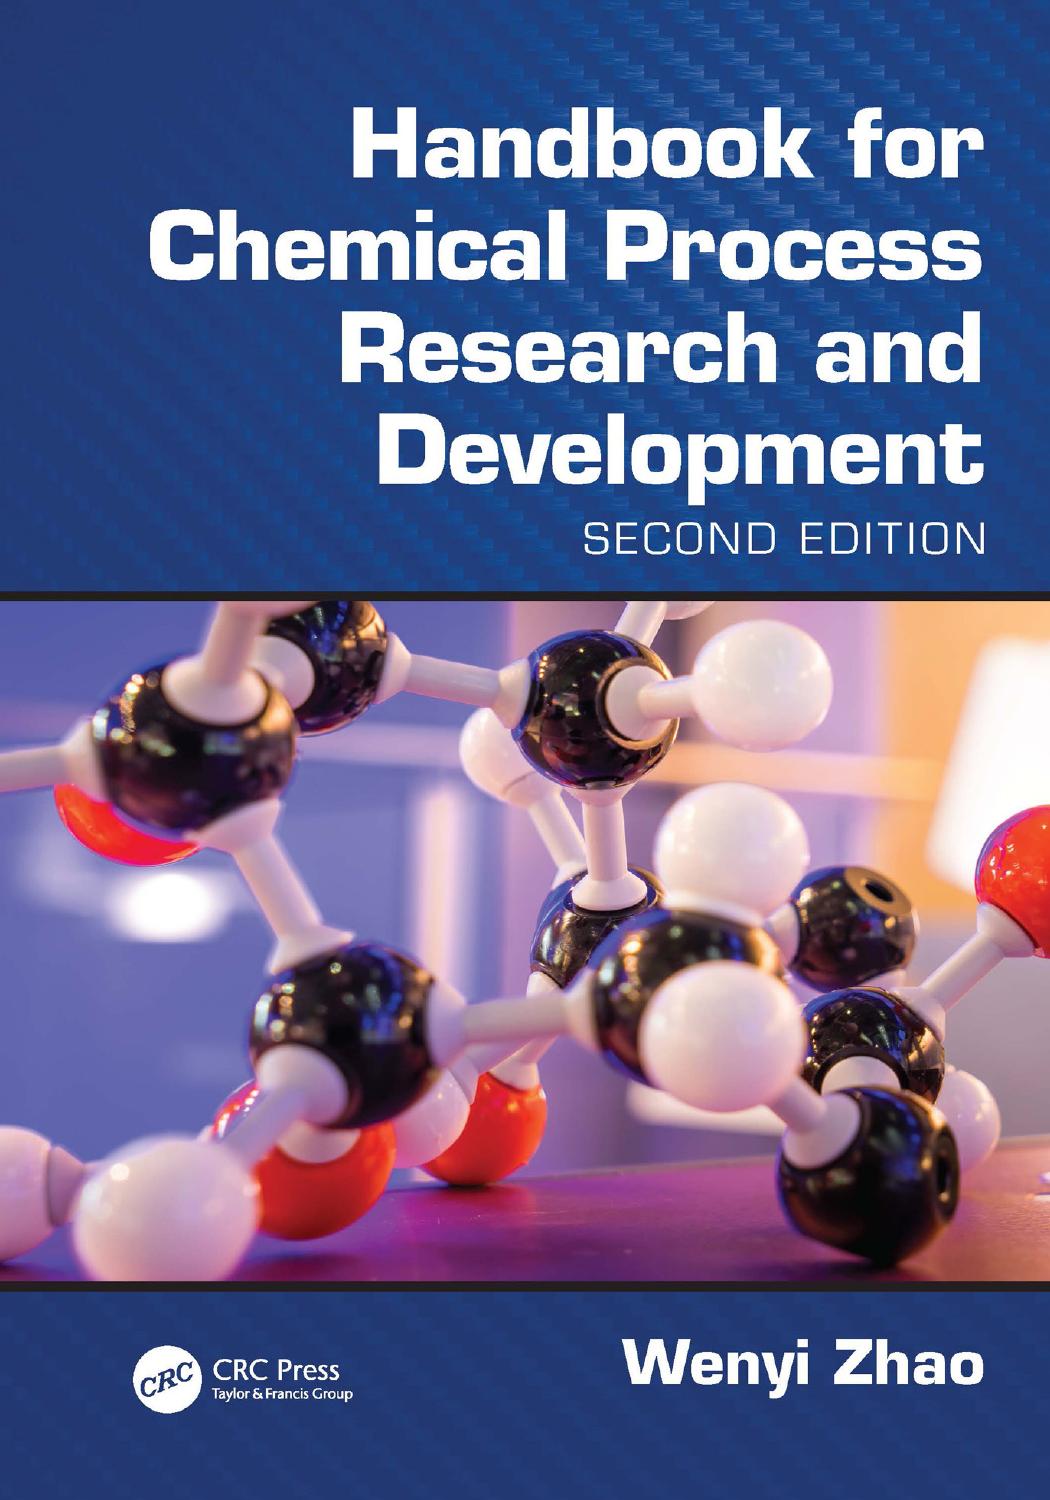 Handbook for Chemical Process Research and Development, by Wenyi Zhao